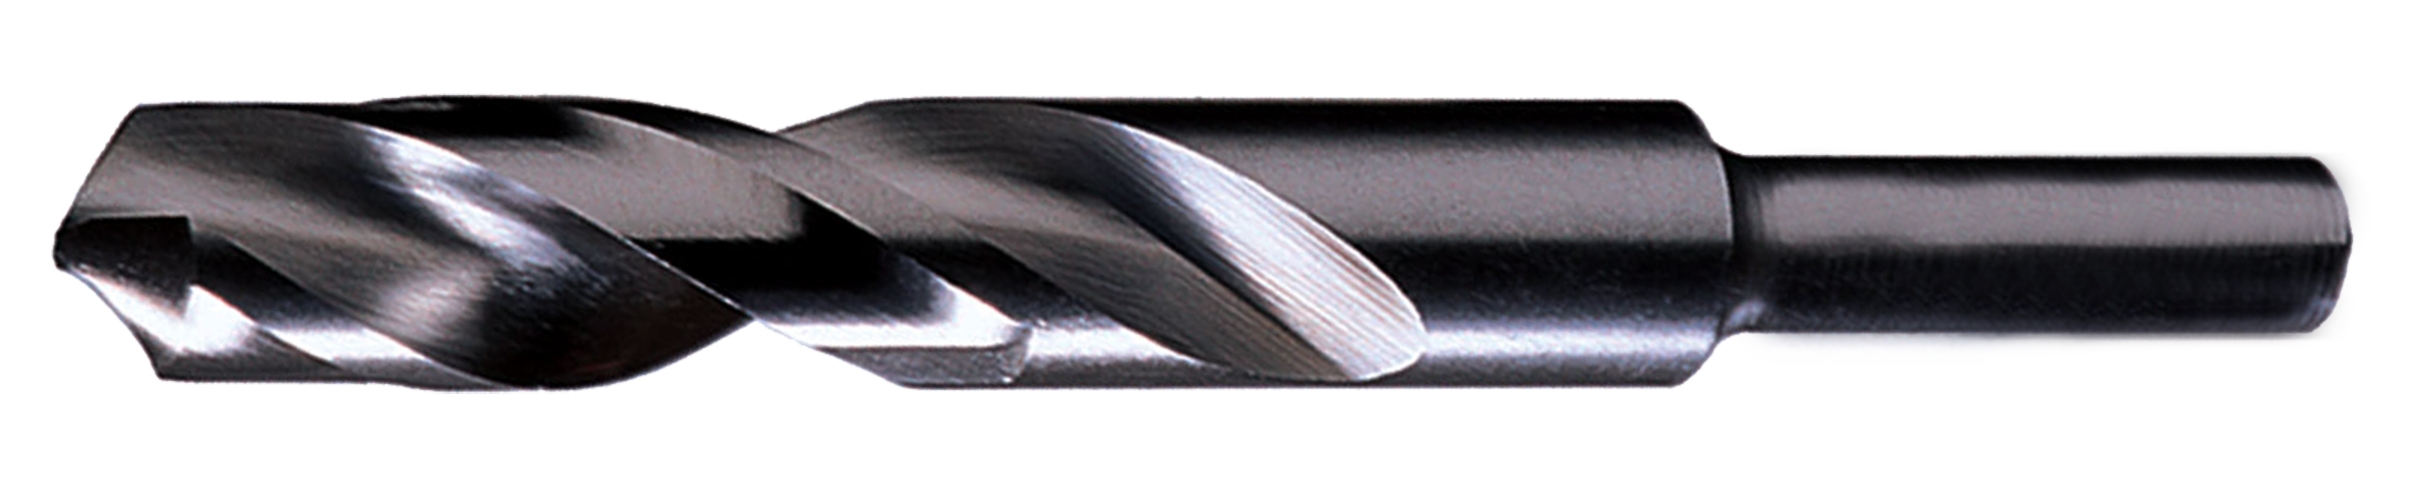 Chicago-Latrobe® 55454 190 General Purpose Silver & Deming Drill, 27/32 in Drill - Fraction, 0.8438 in Drill - Decimal Inch, 1/2 in Shank, HSS